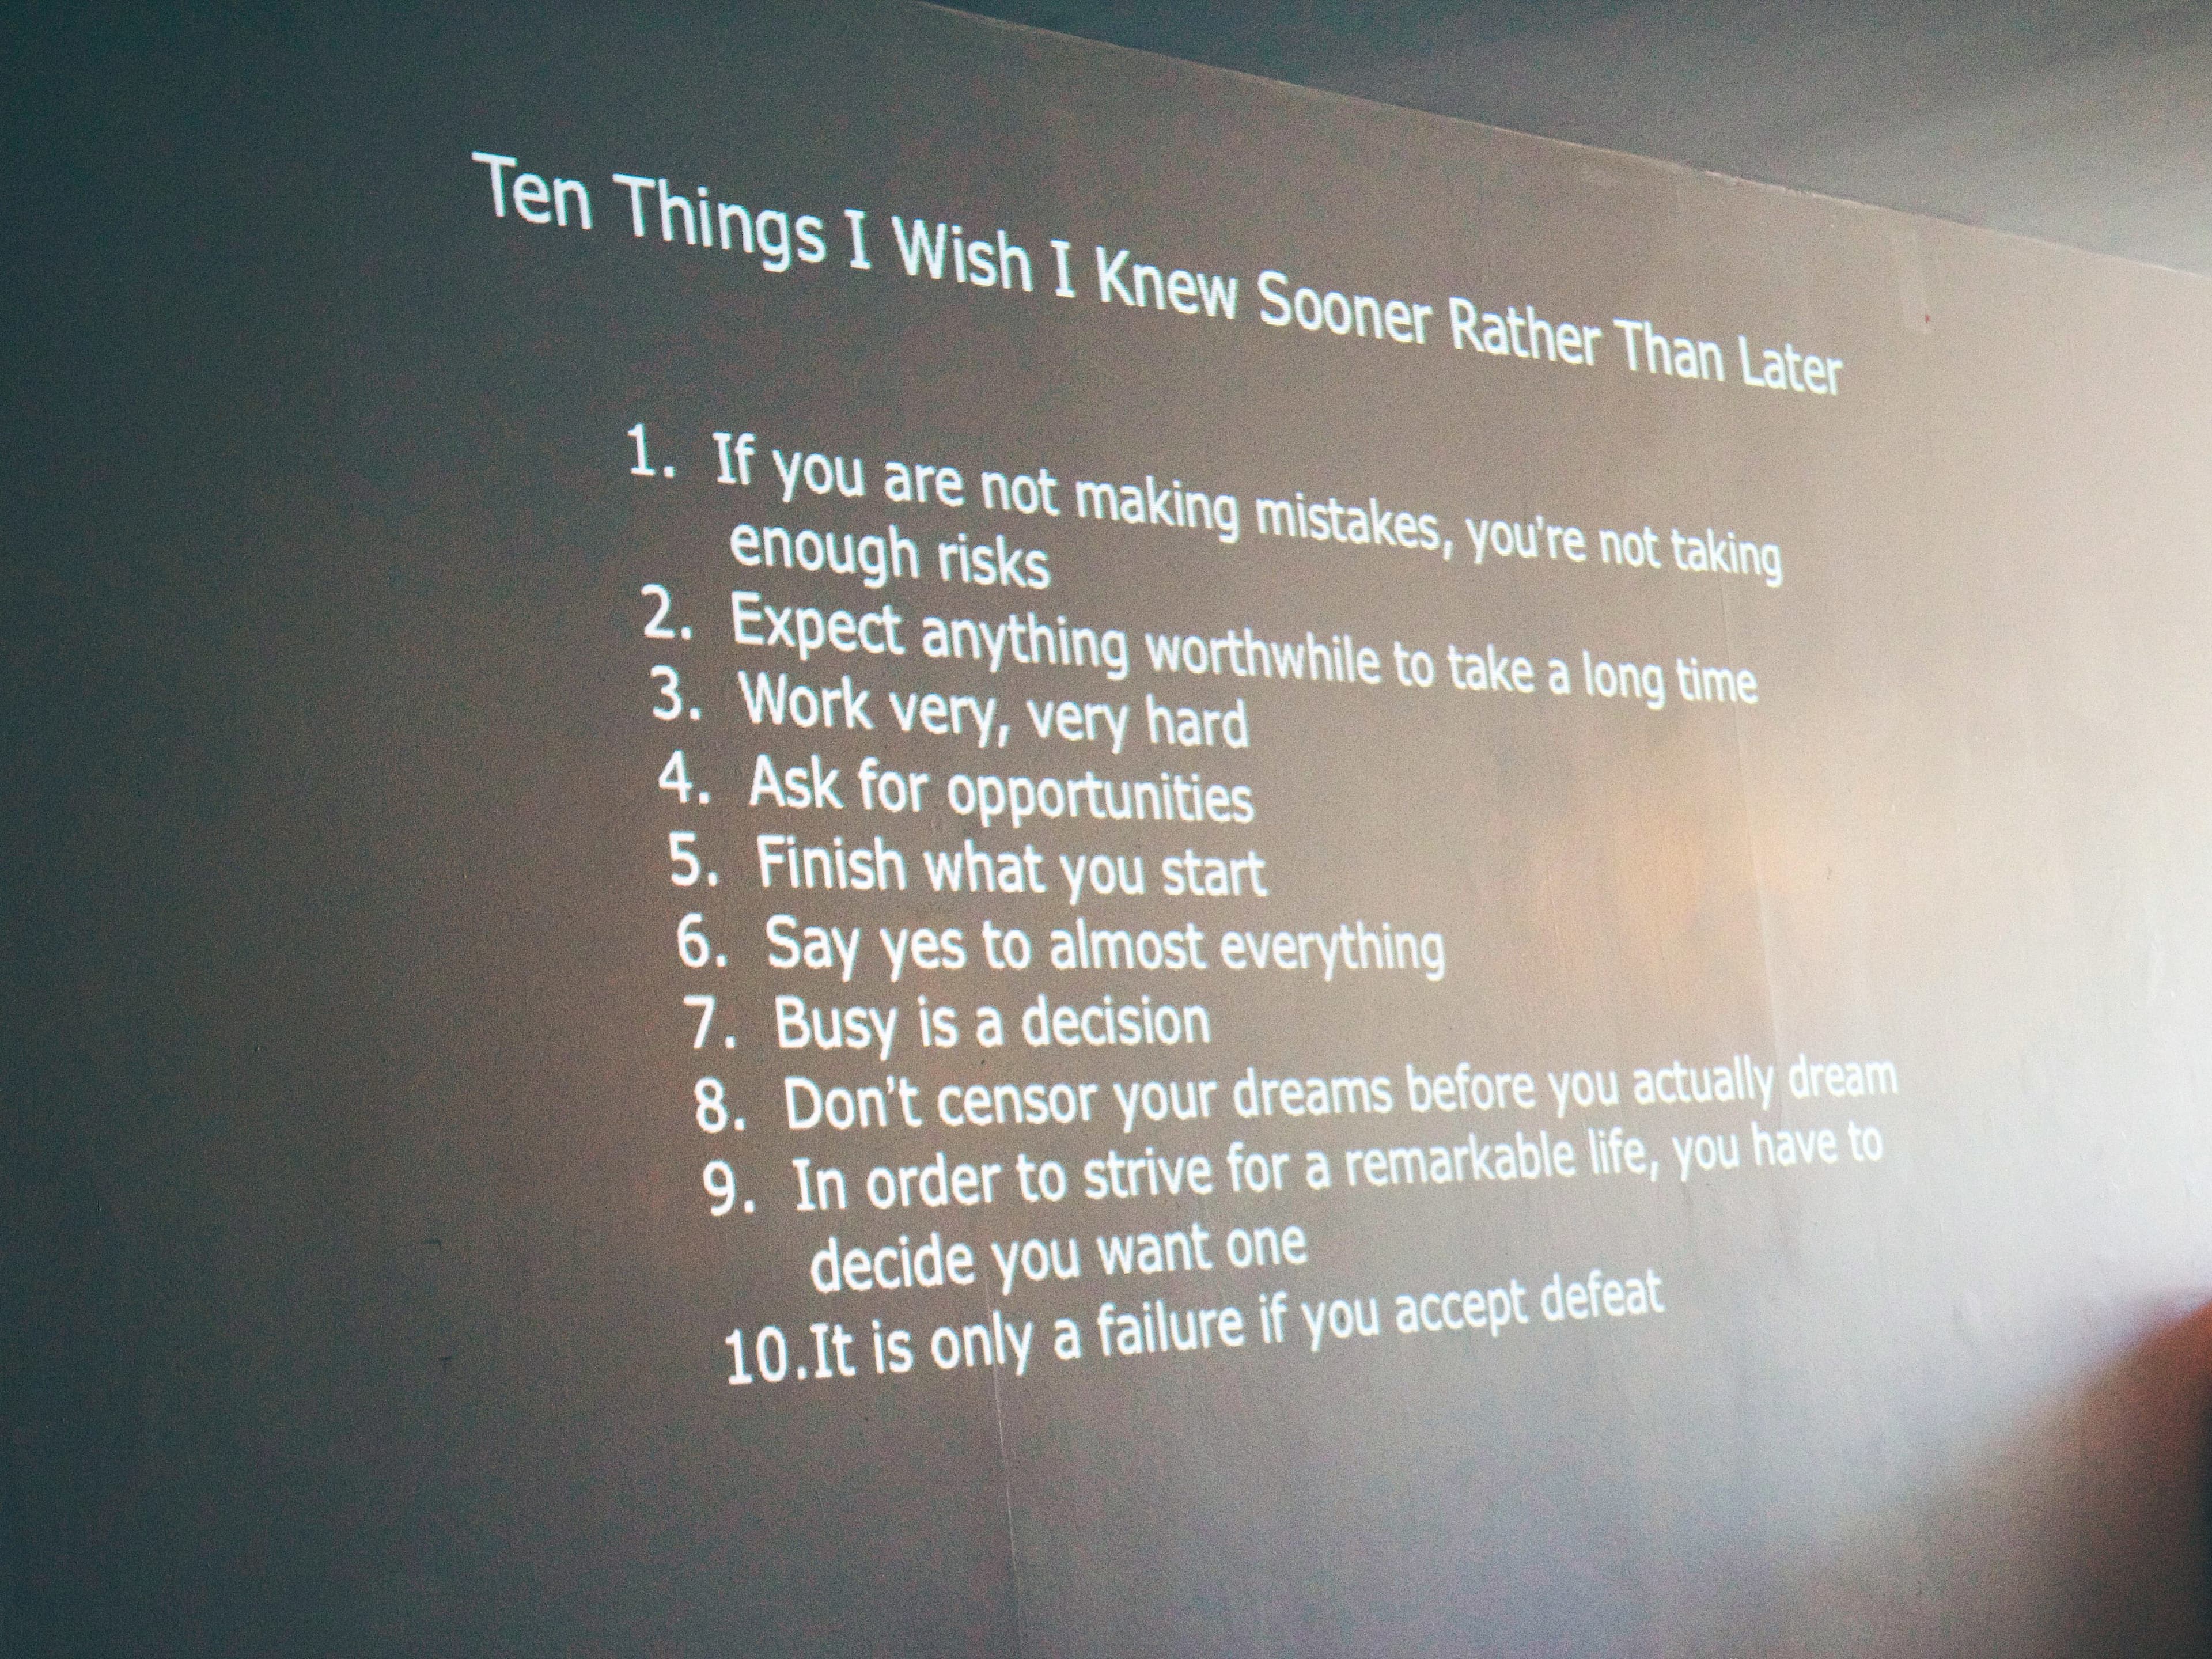 A projected list titled "Ten Things I Wish I Knew Sooner Rather Than Later" on a wall. The list includes advice such as taking risks, working hard, asking for opportunities, finishing what you start, and not censoring dreams. The room is dimly lit.